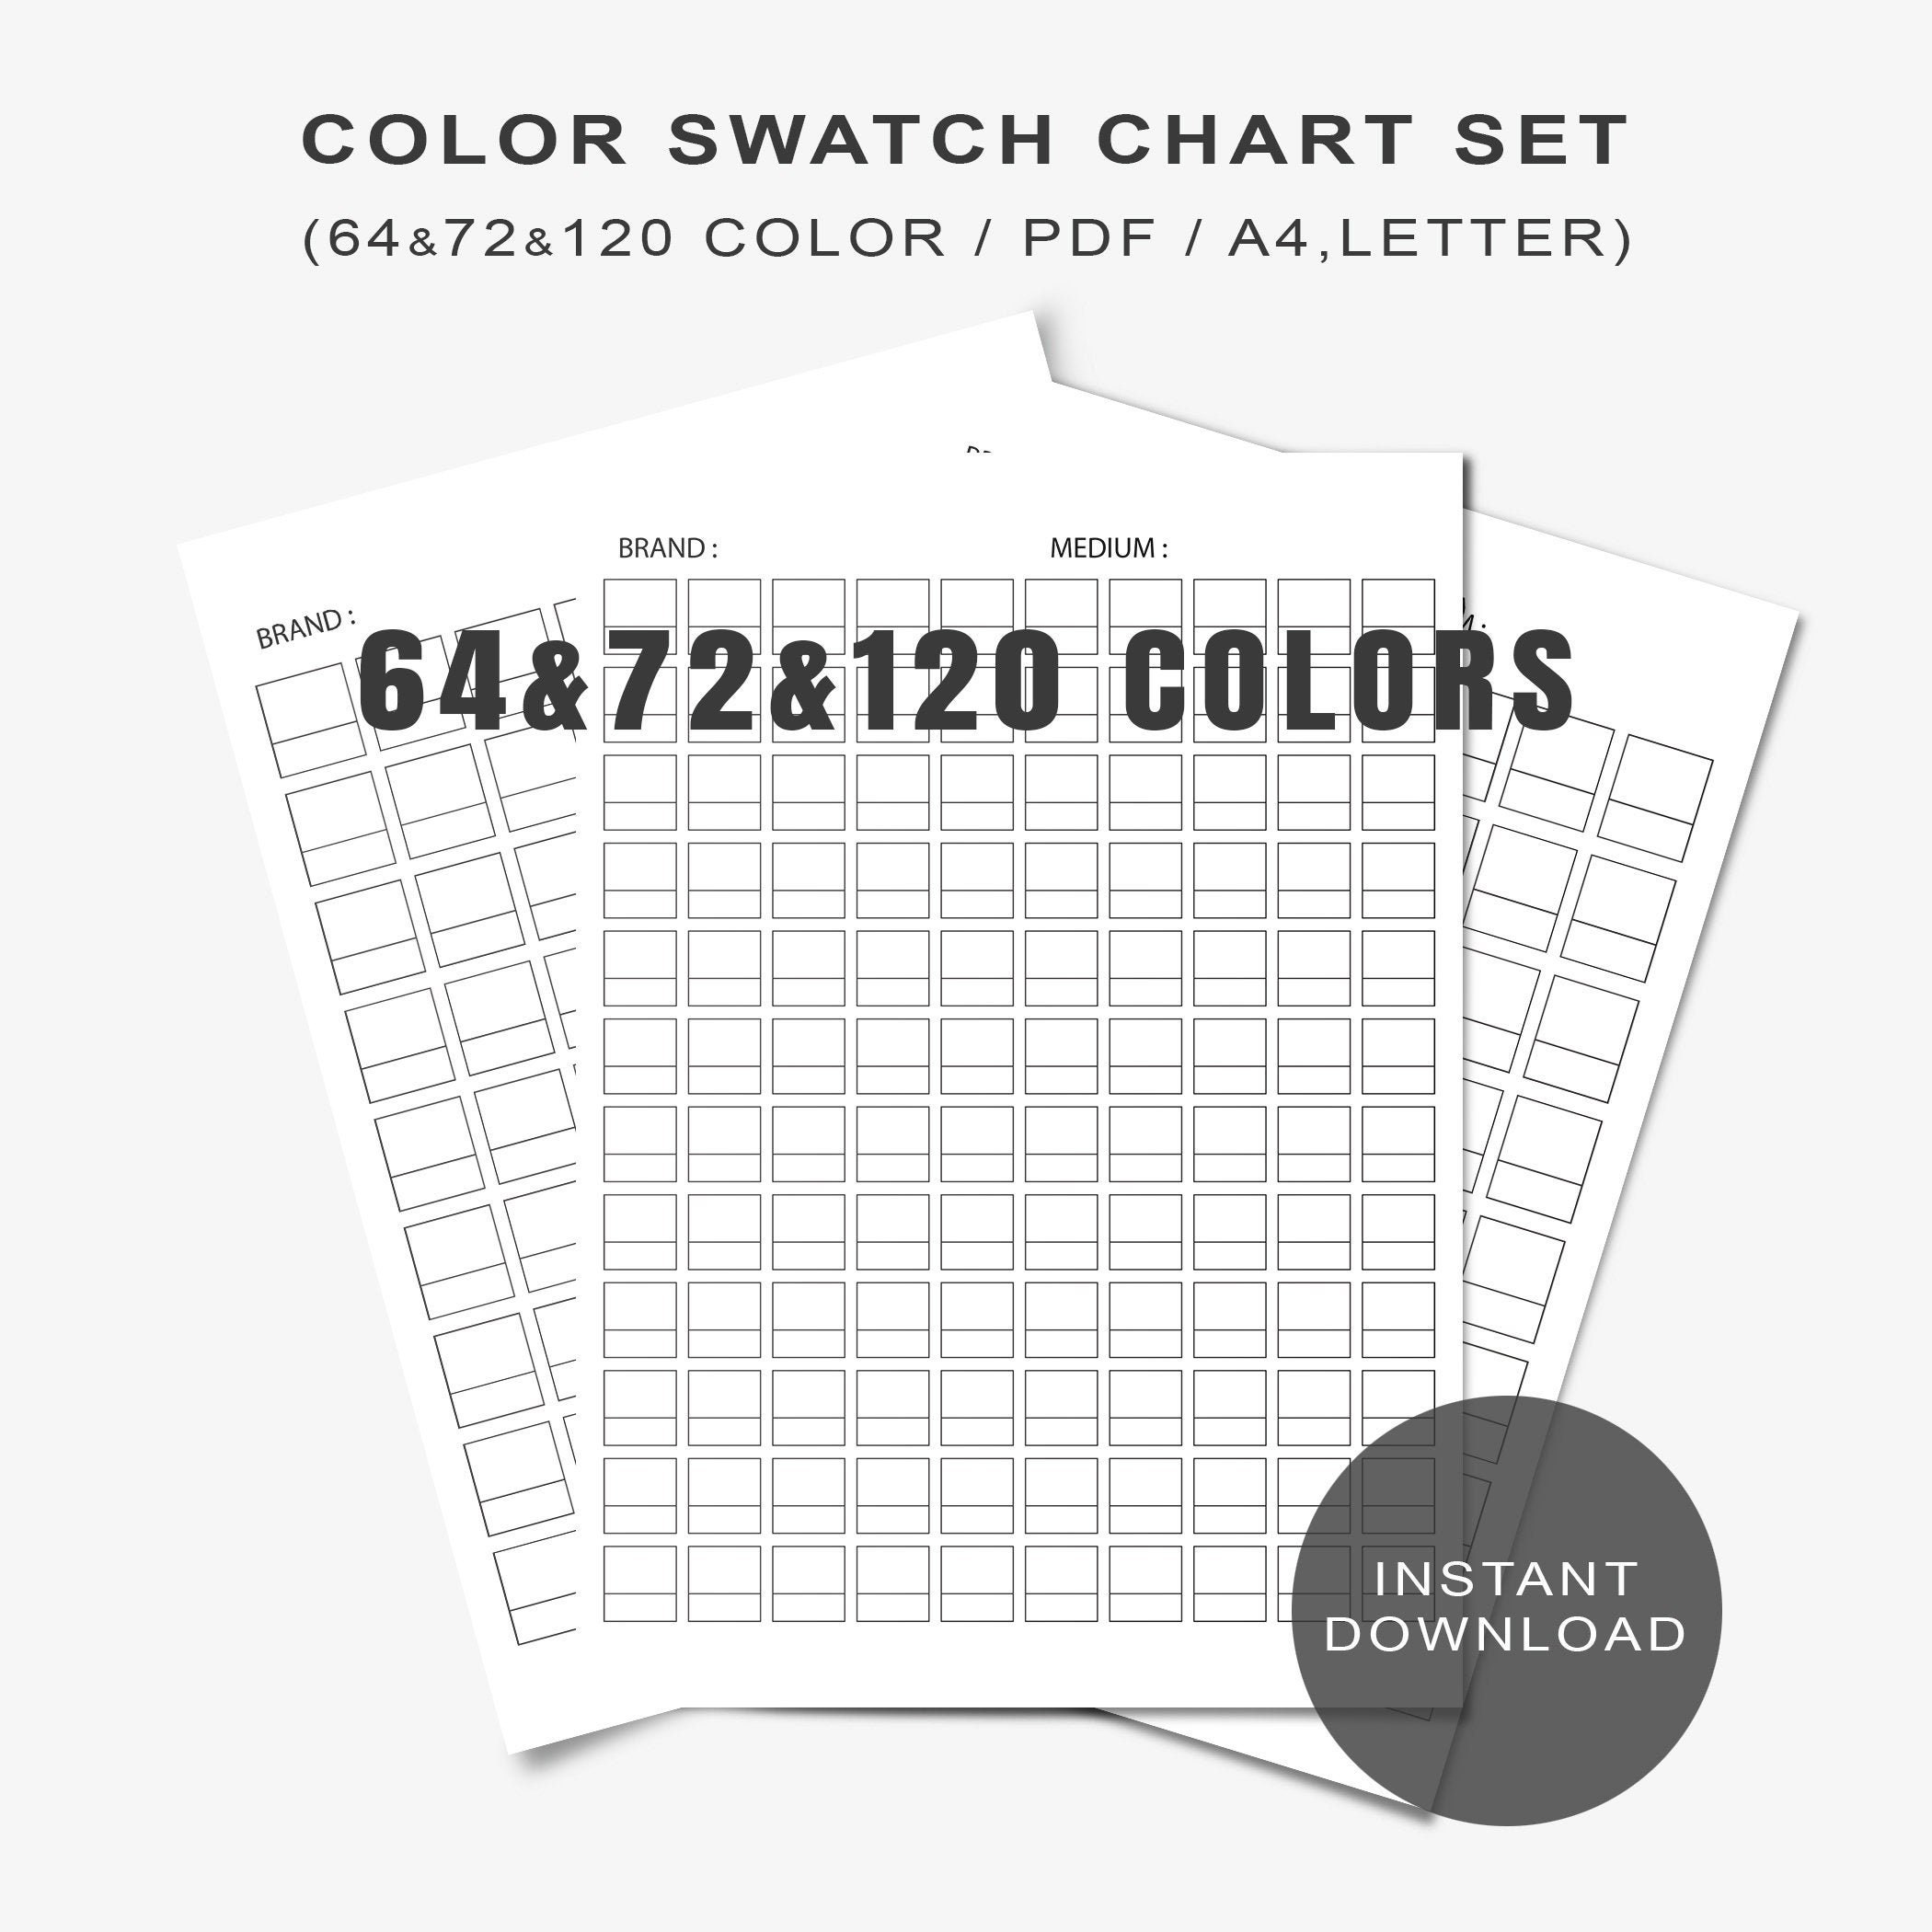 printable-color-swatch-chart-to-give-back-to-the-adult-coloring-community-i-have-developed